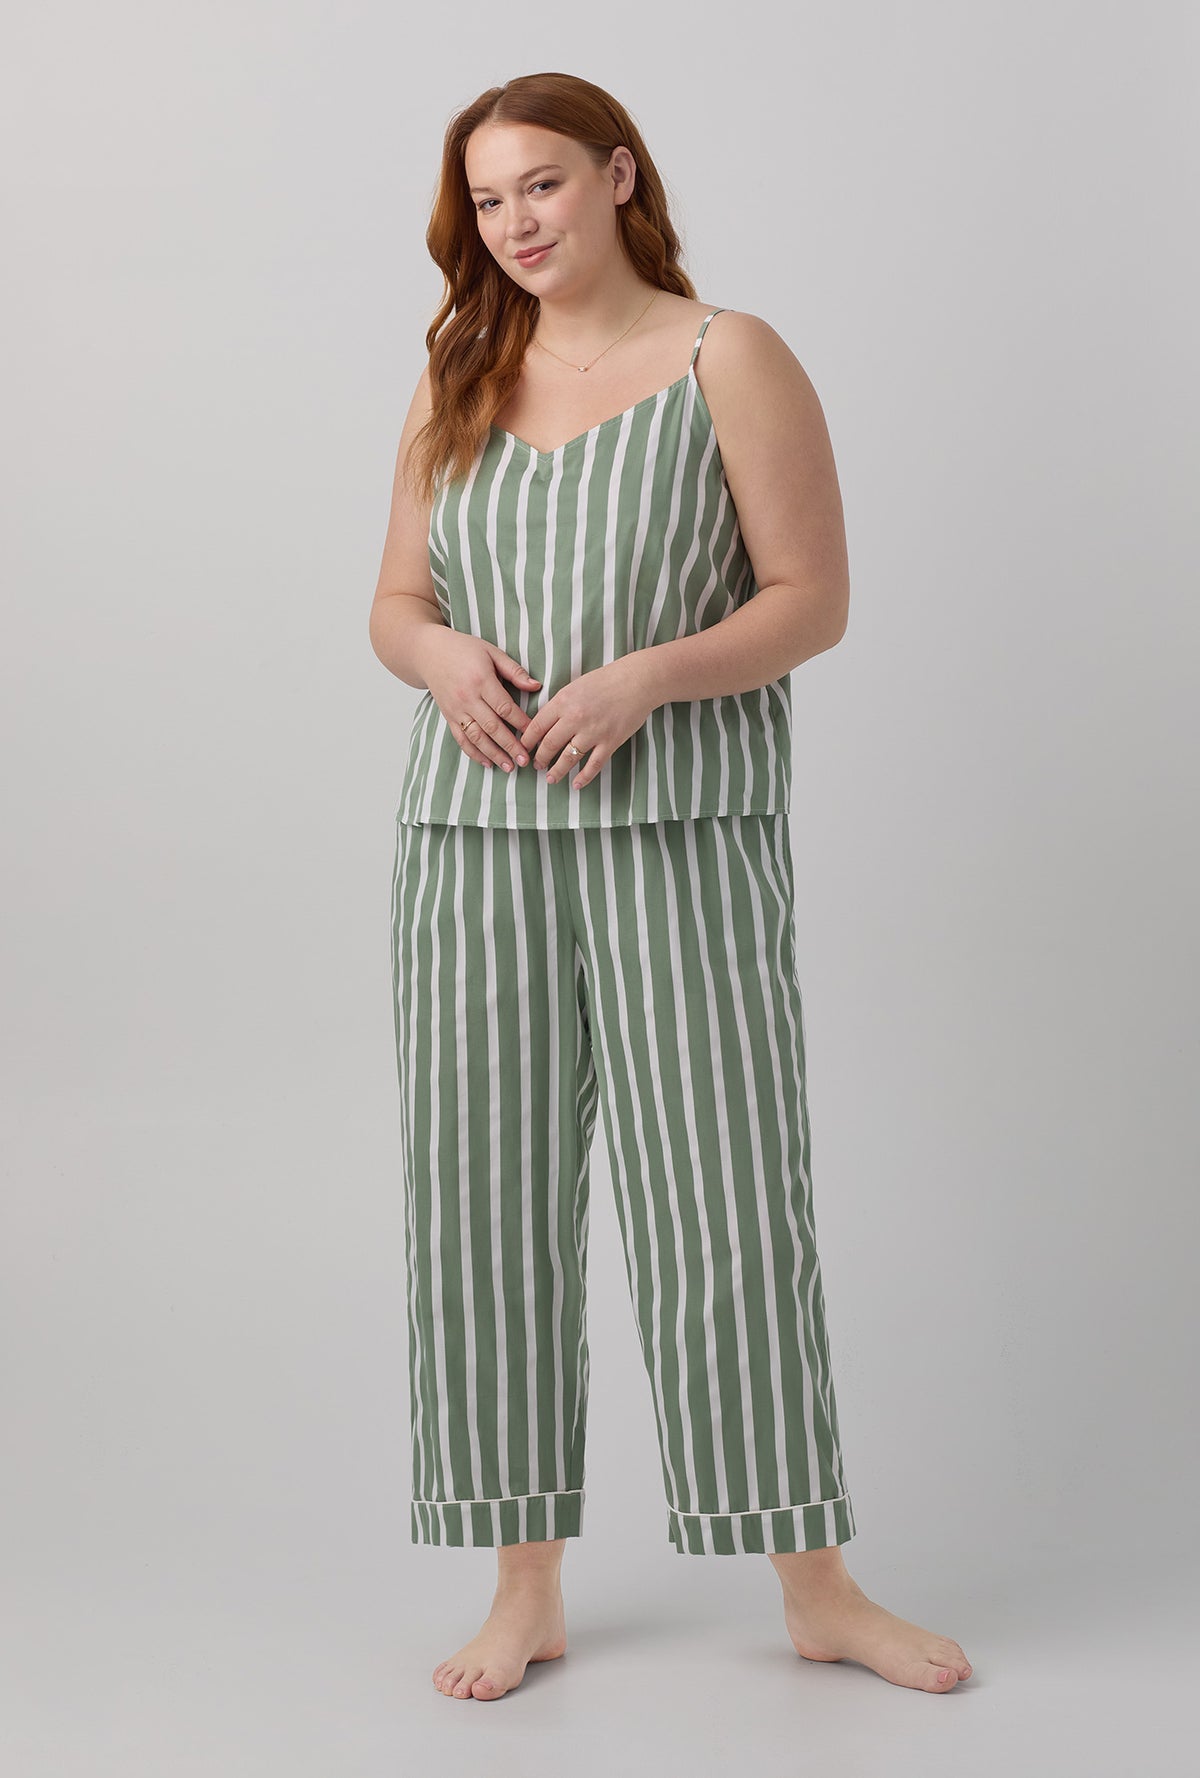 A lady wearing plus size green Woven Cotton Sateen Cropped PJ Set with North Shore Stripe print.